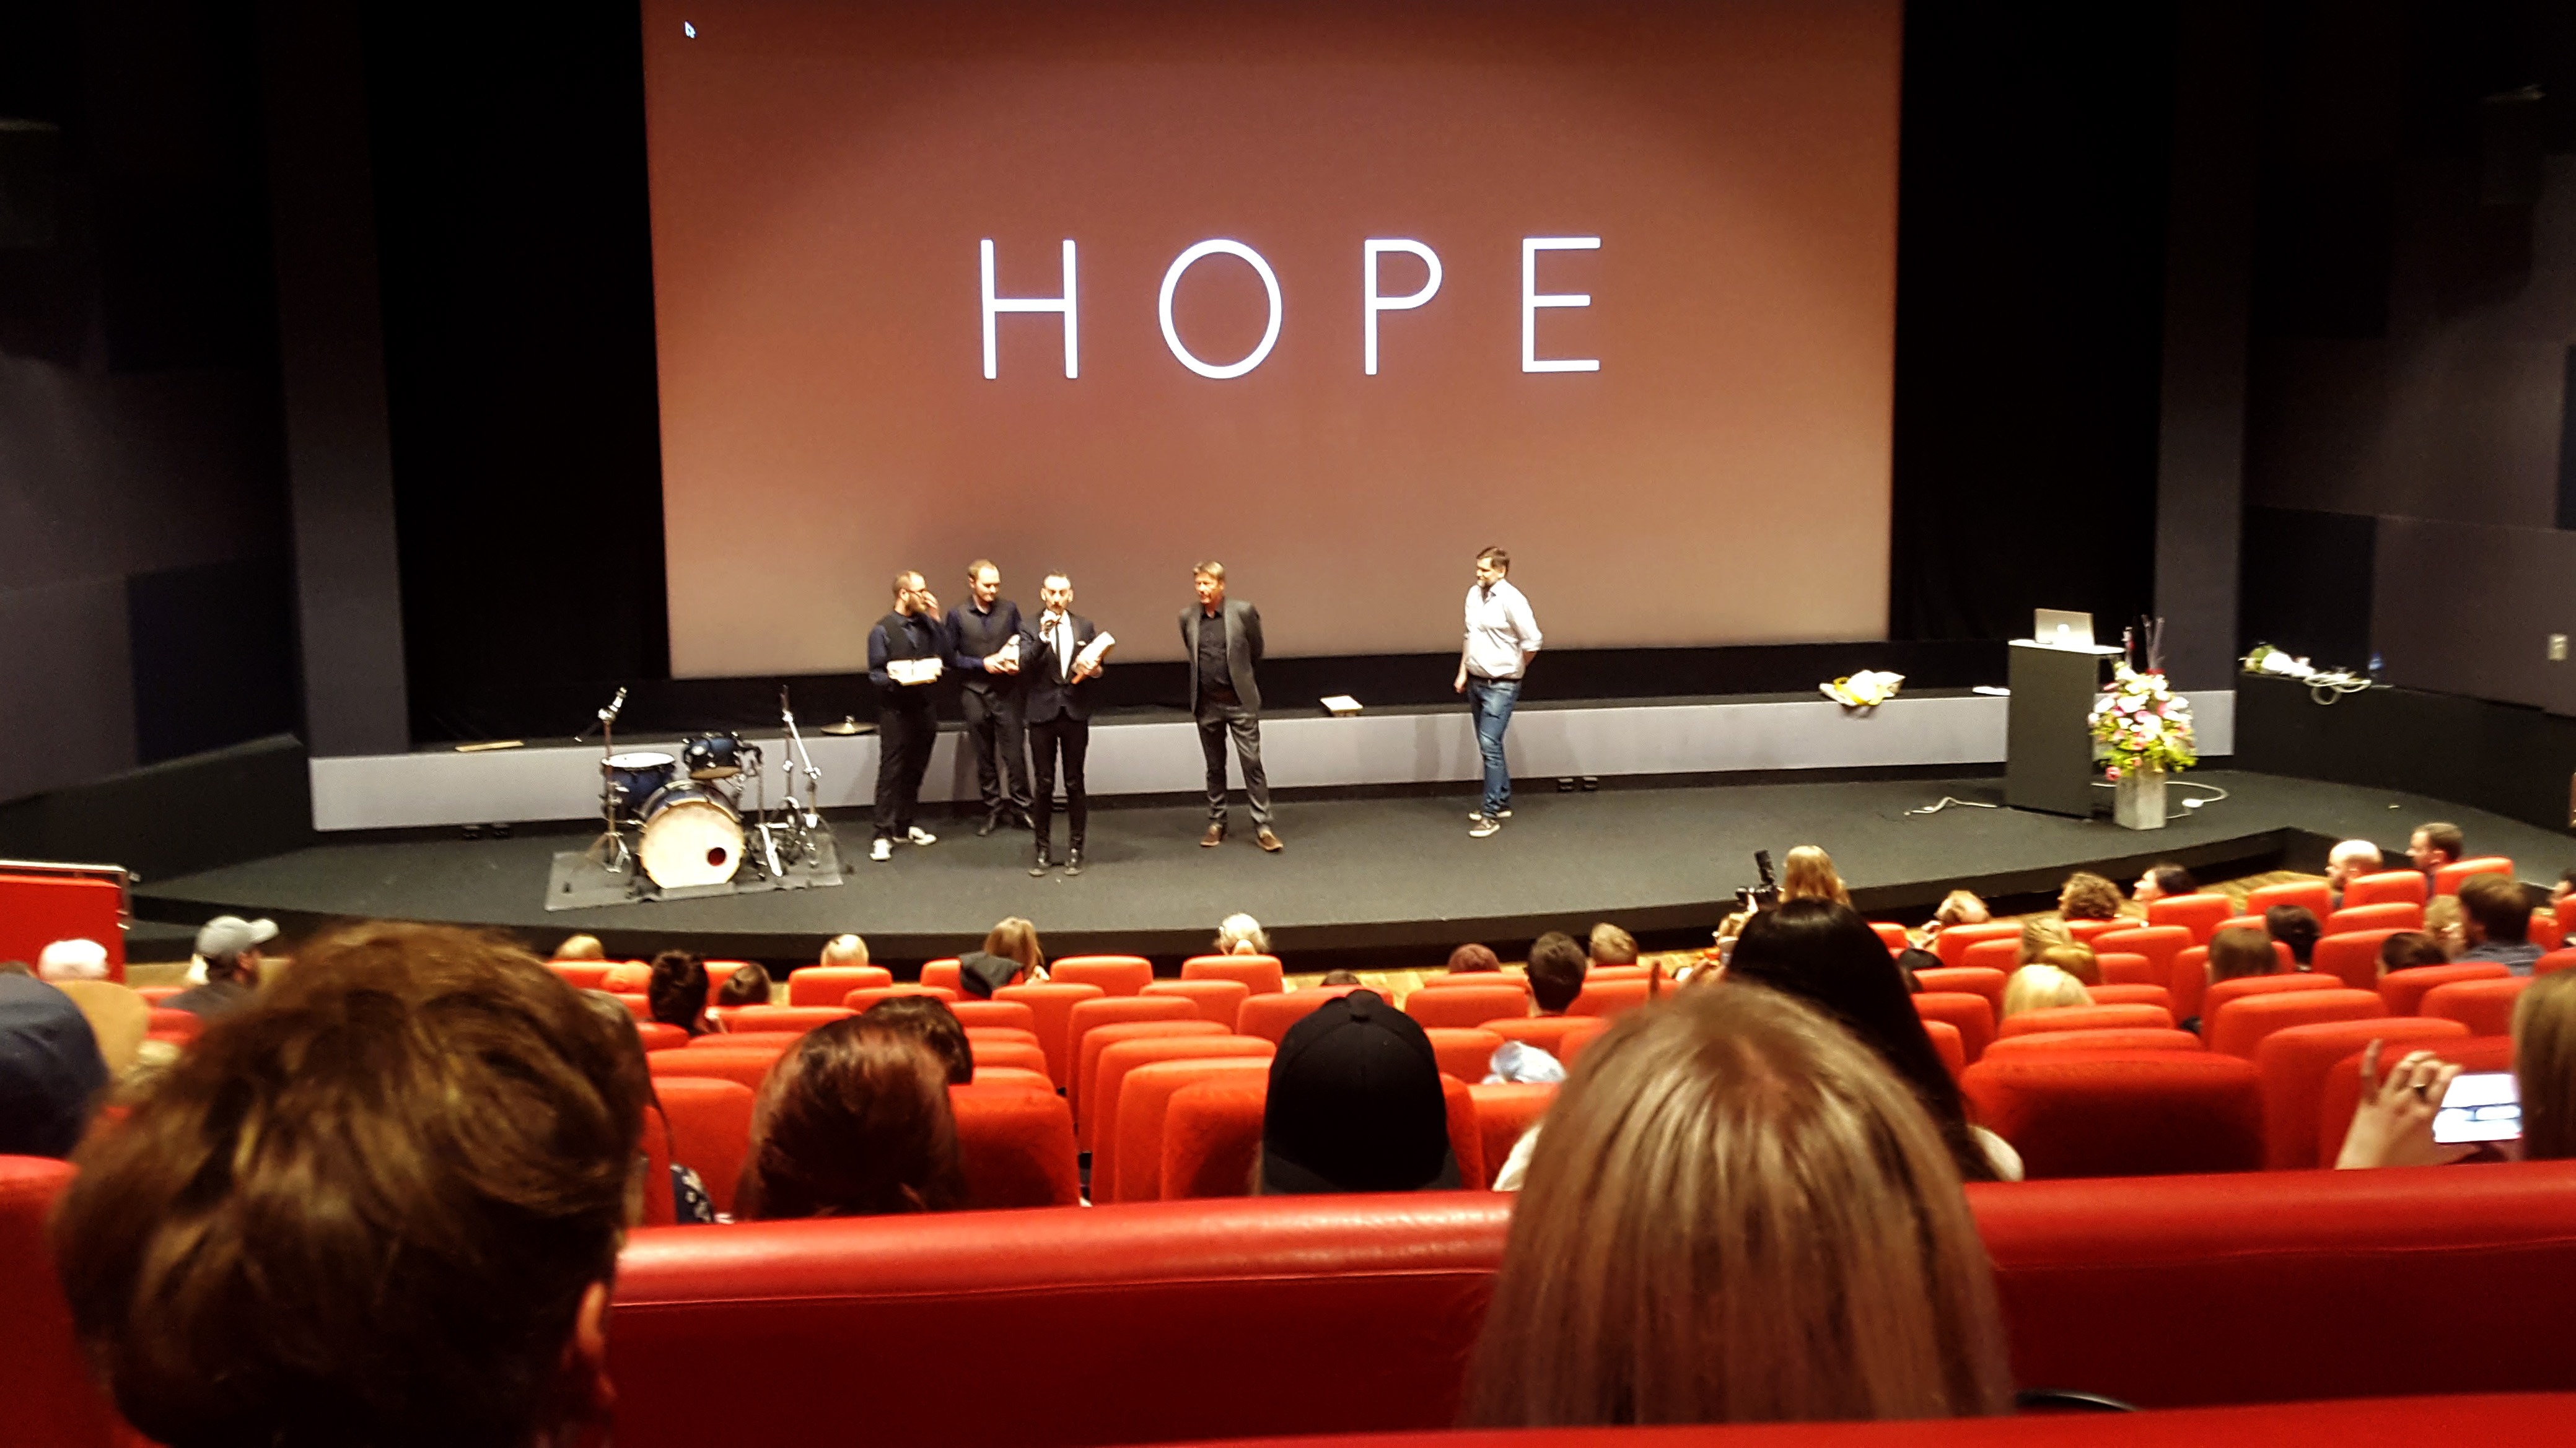 You are currently viewing Hope, Short Film: First preview and First award!